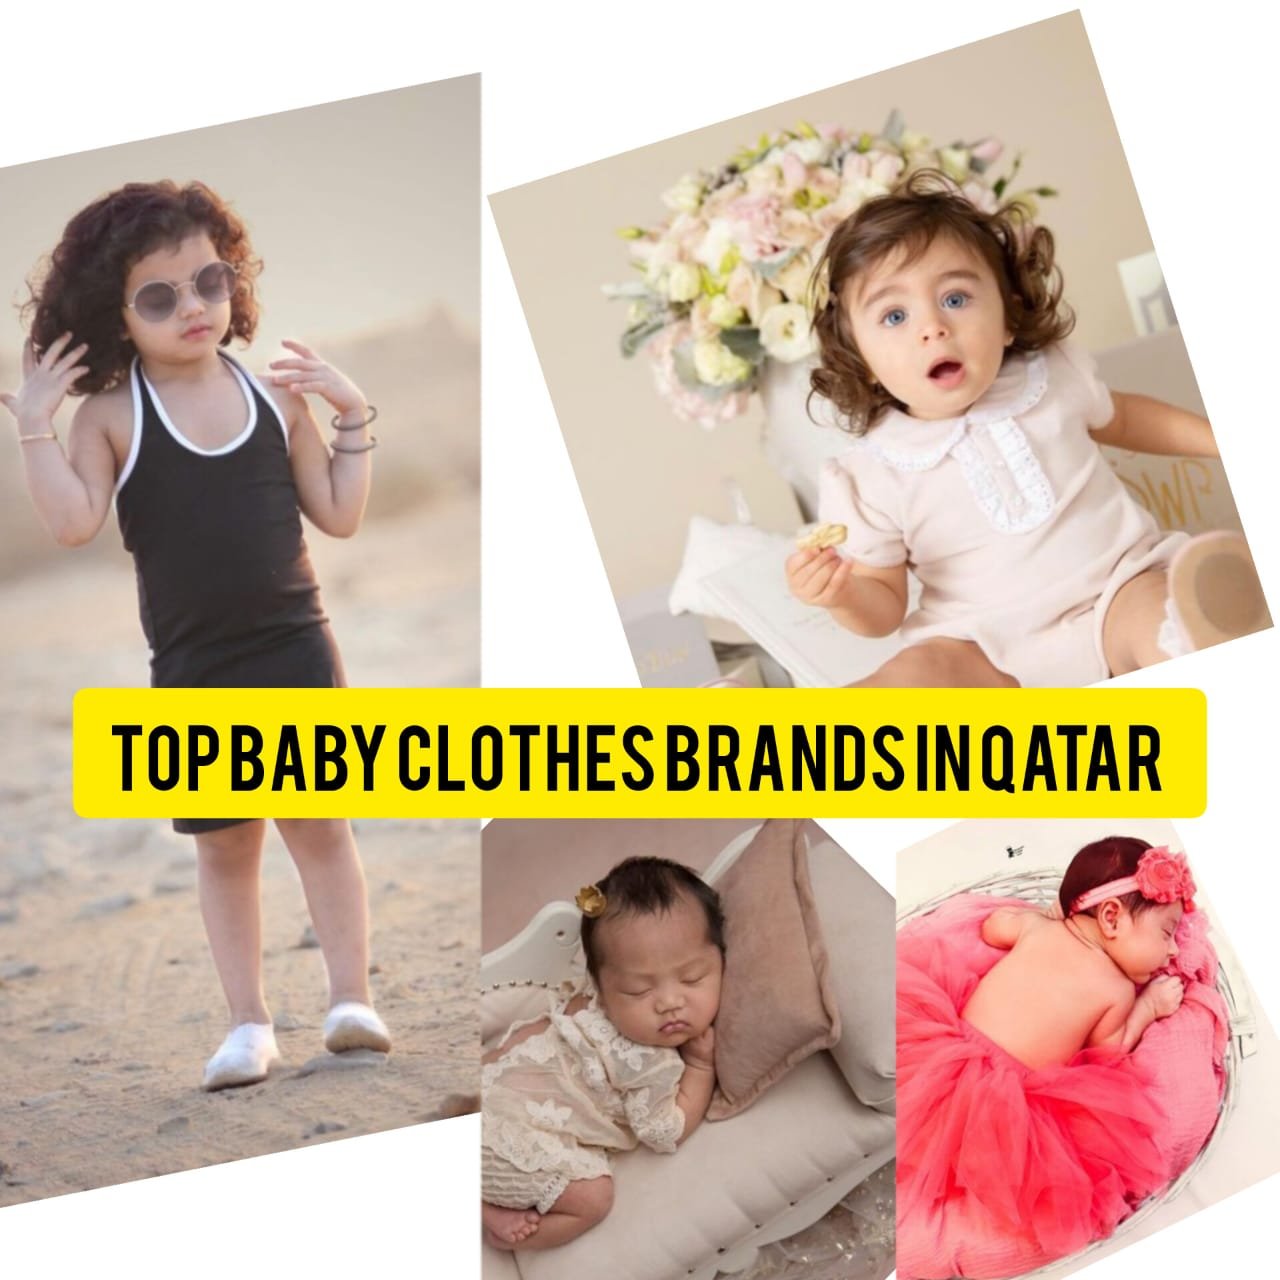 Baby clothes brands in Qatar